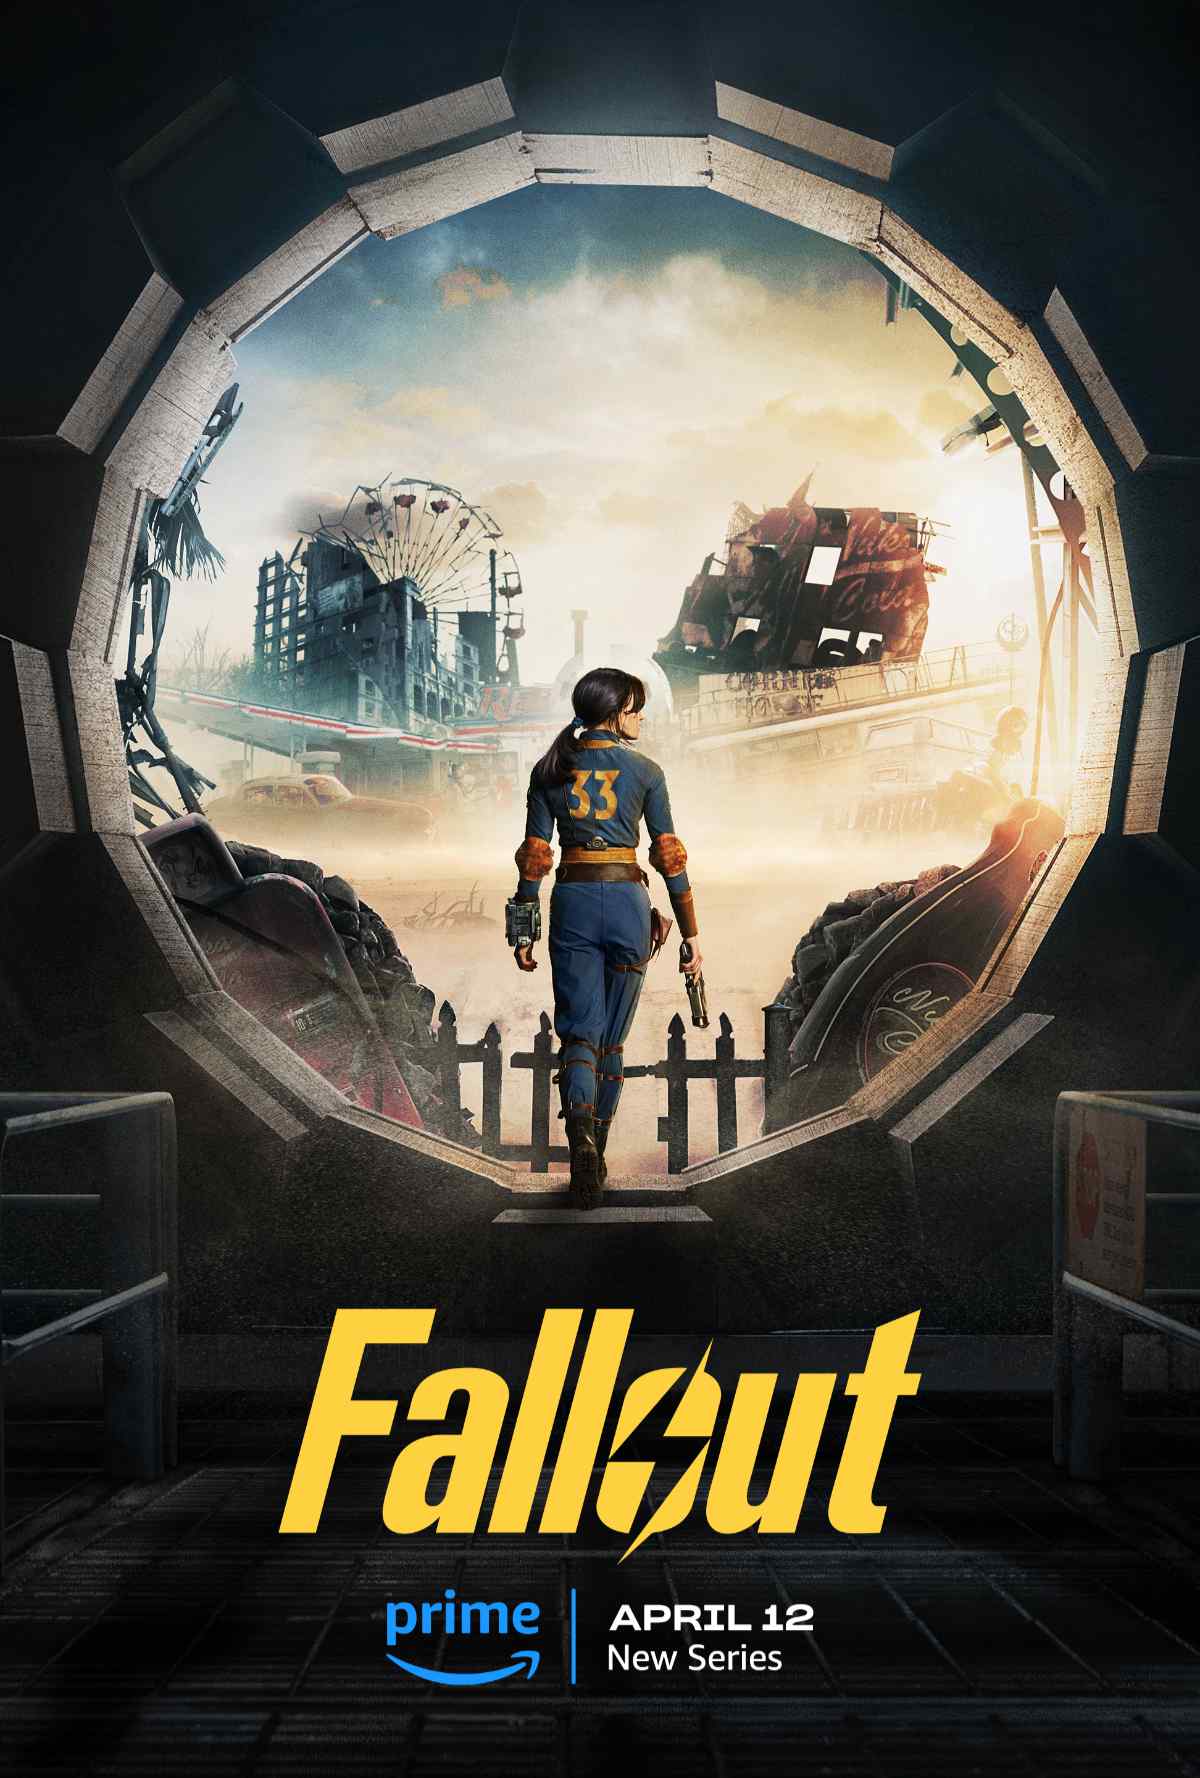 Fallout Series Reveals Teaser and Character Art